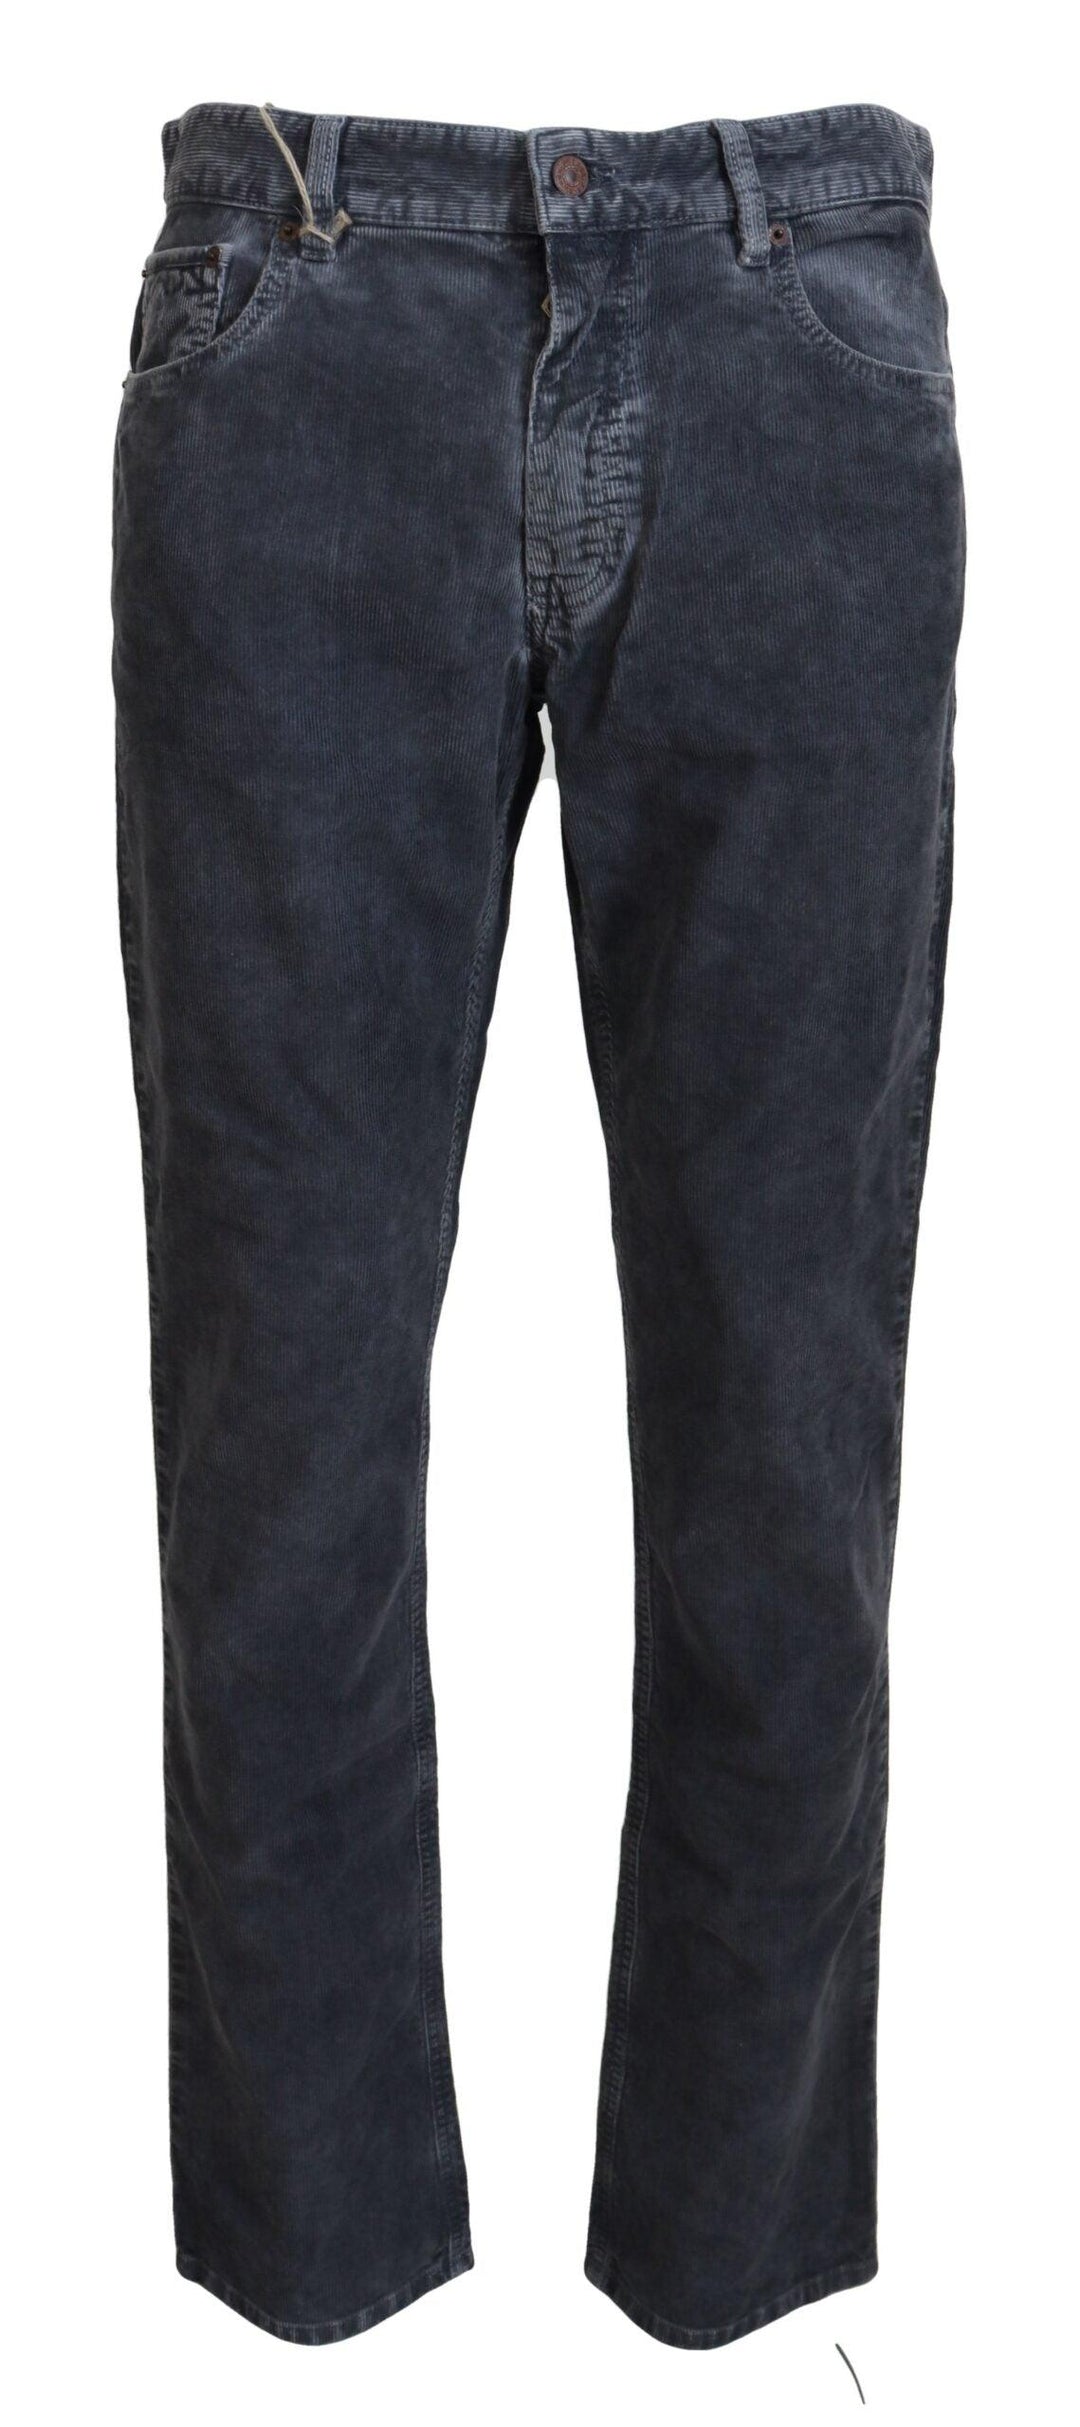 Polo by Ralph Lauren Gray Washed Cotton Corduroy Jeans - Ellie Belle